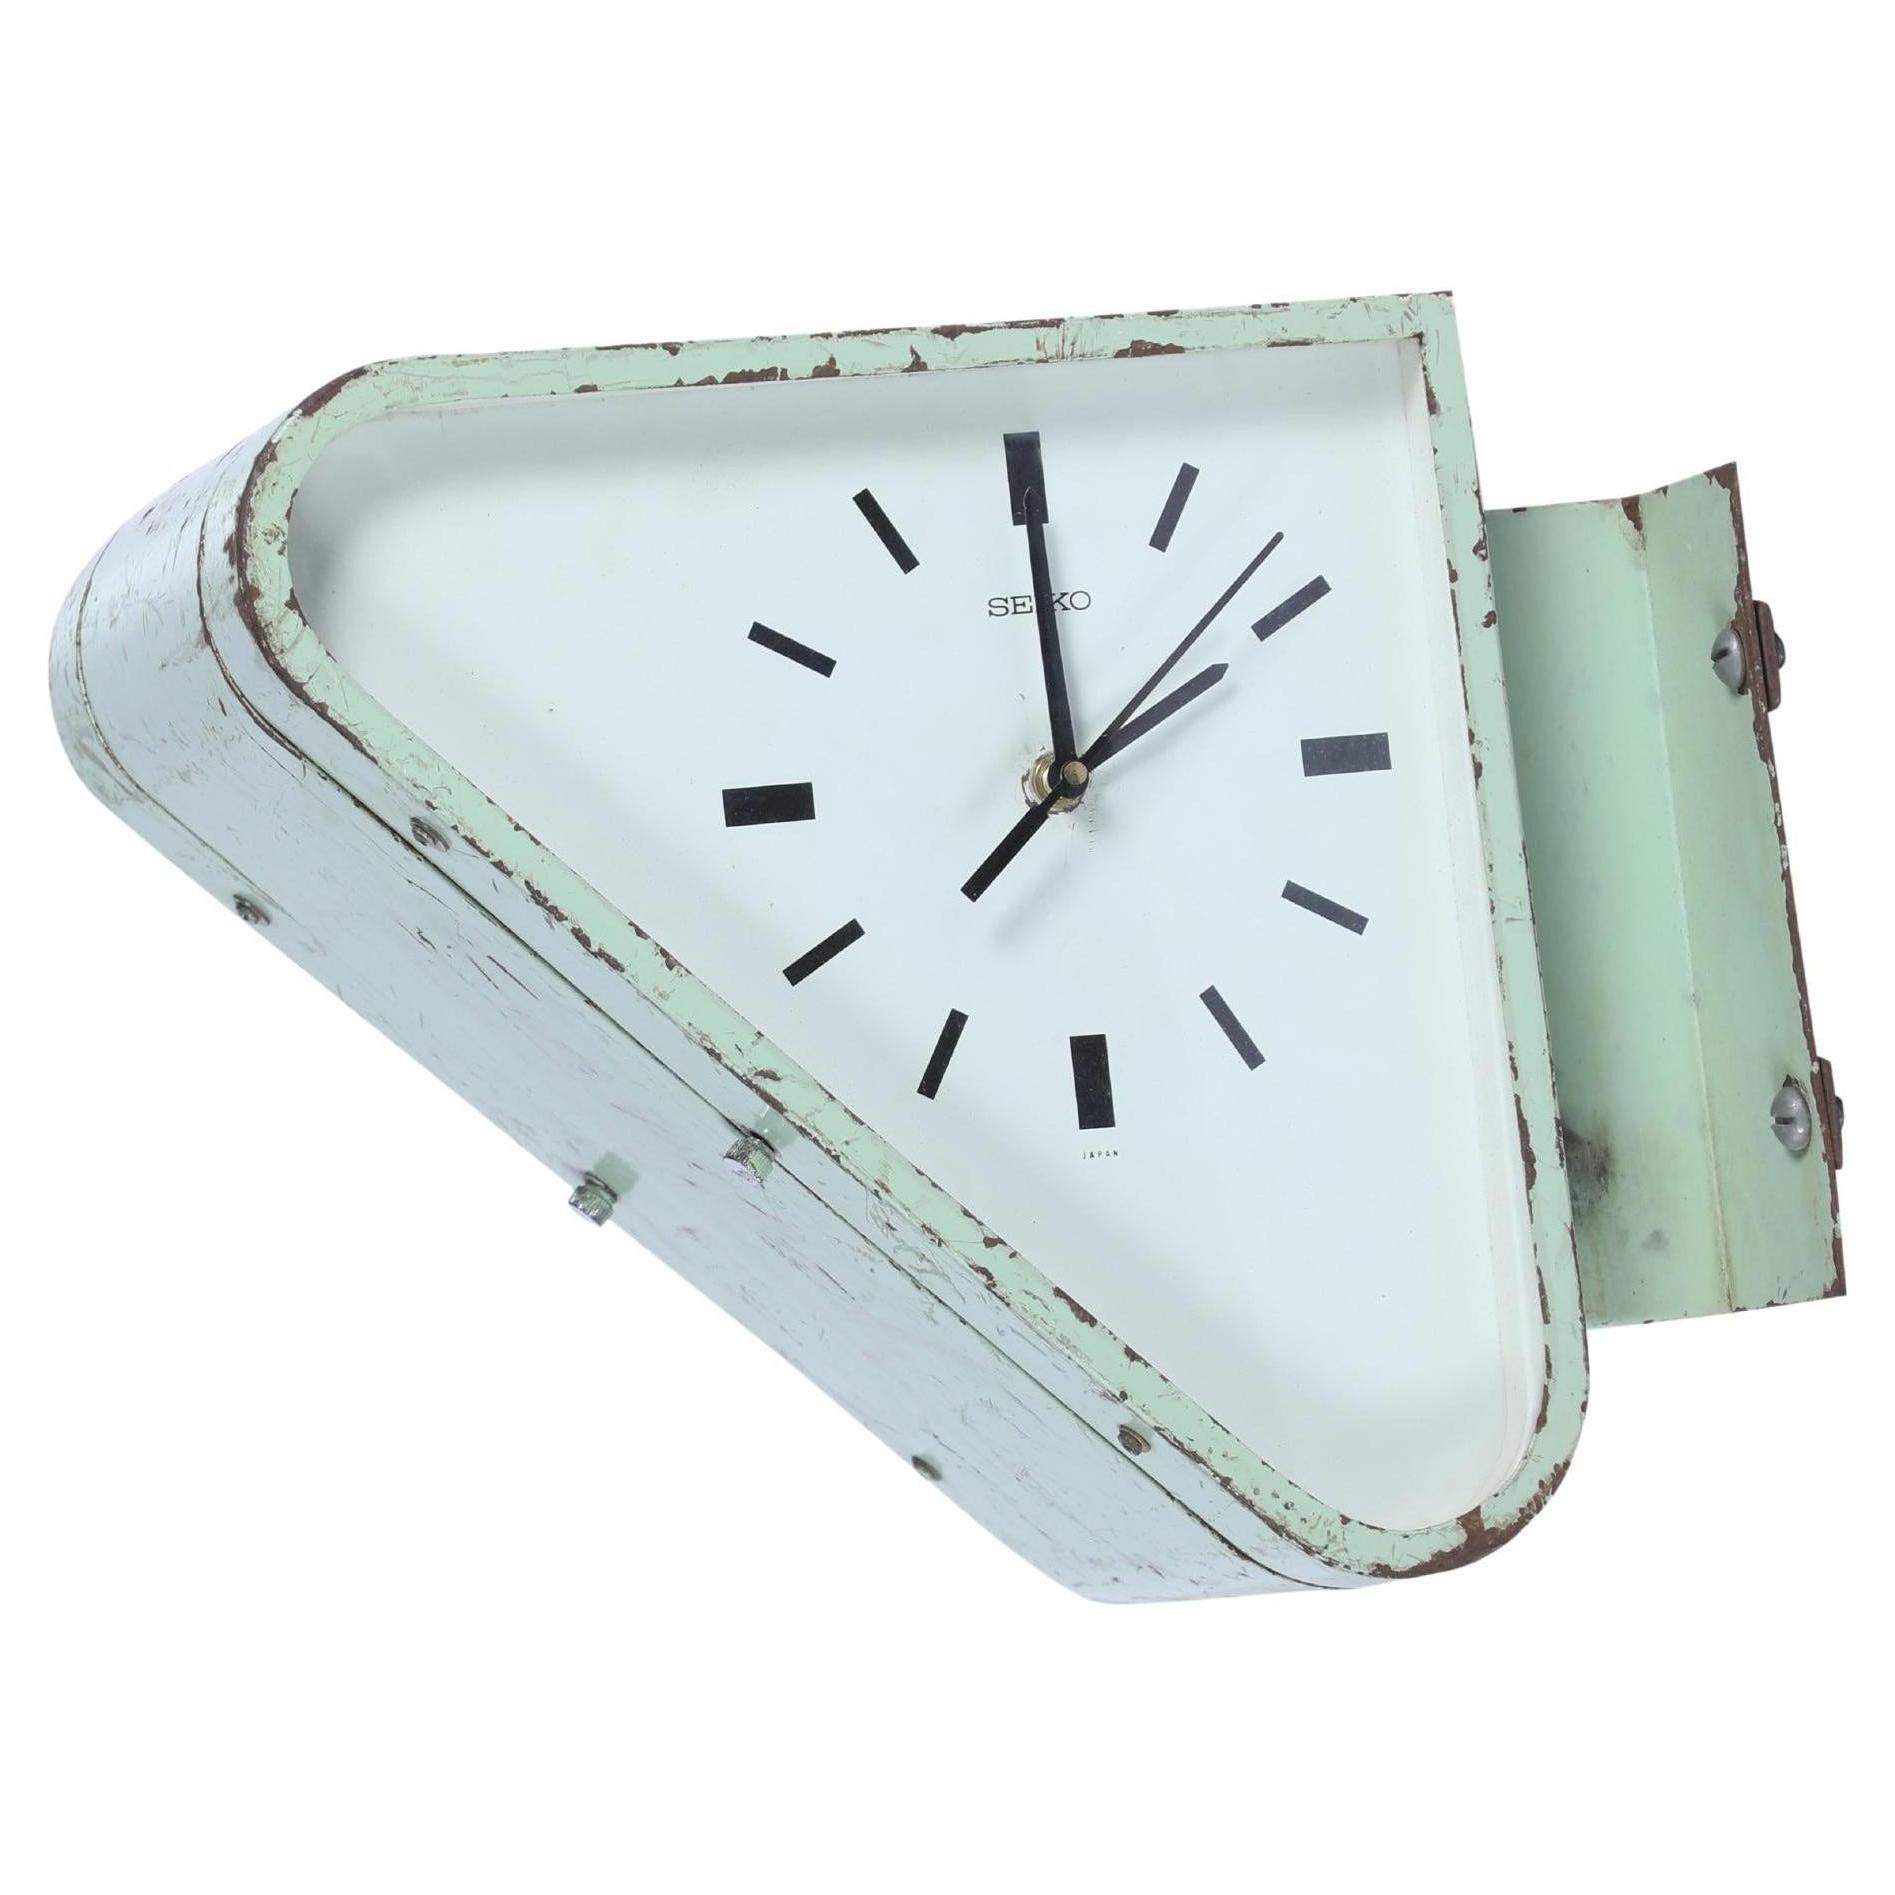 Double-Faced Seiko Wall Clock from Decommissioned Ship, Mid-Century Modern  at 1stDibs